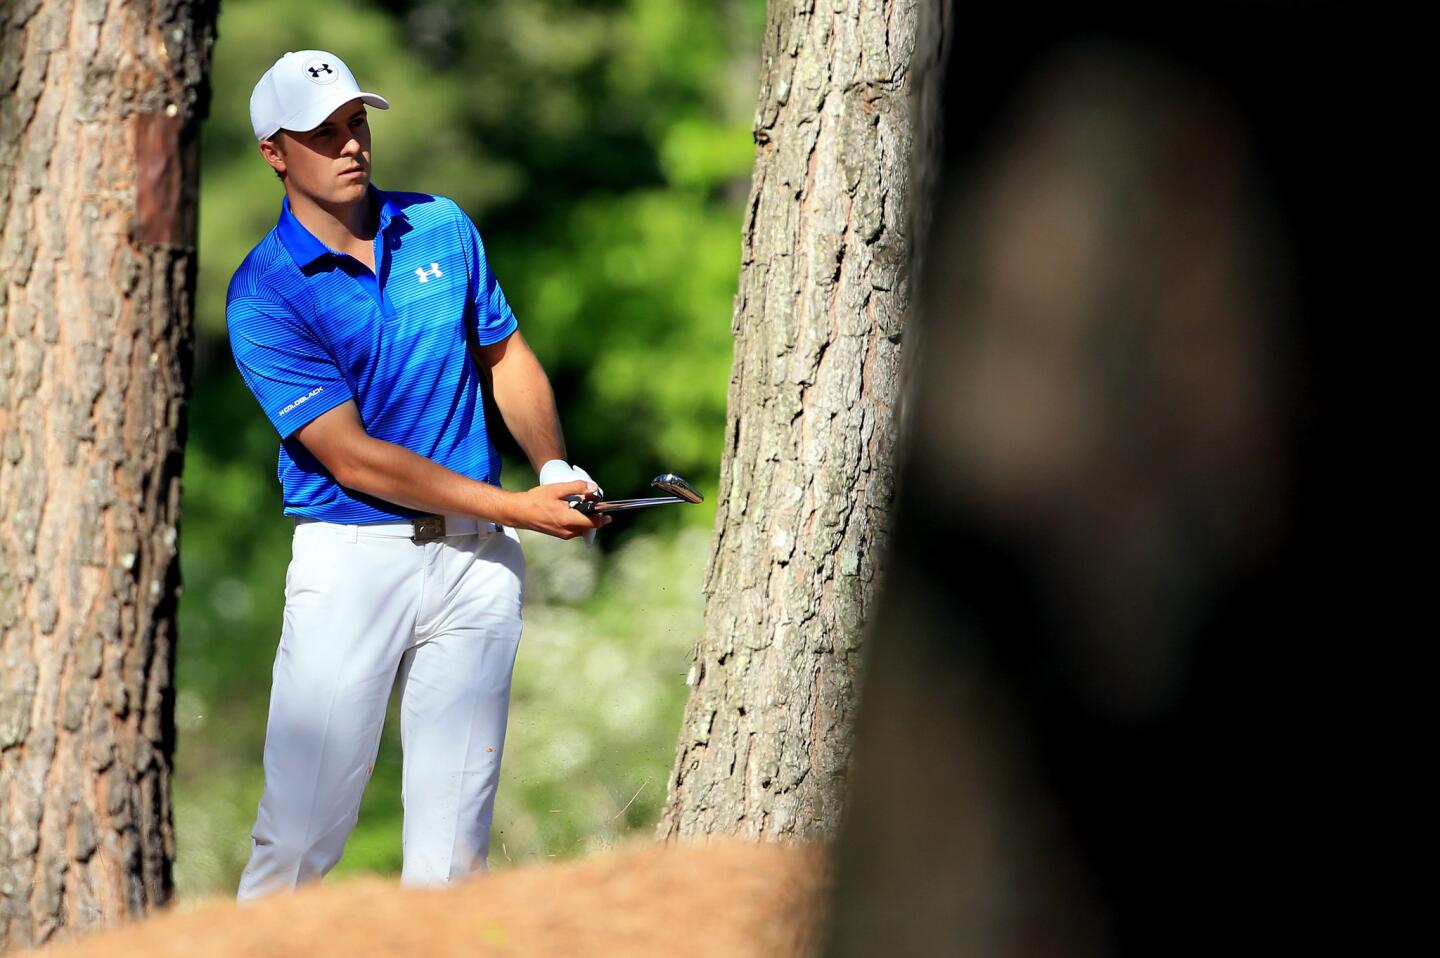 Jordan Spieth is still learning to control his thoughts and emotions